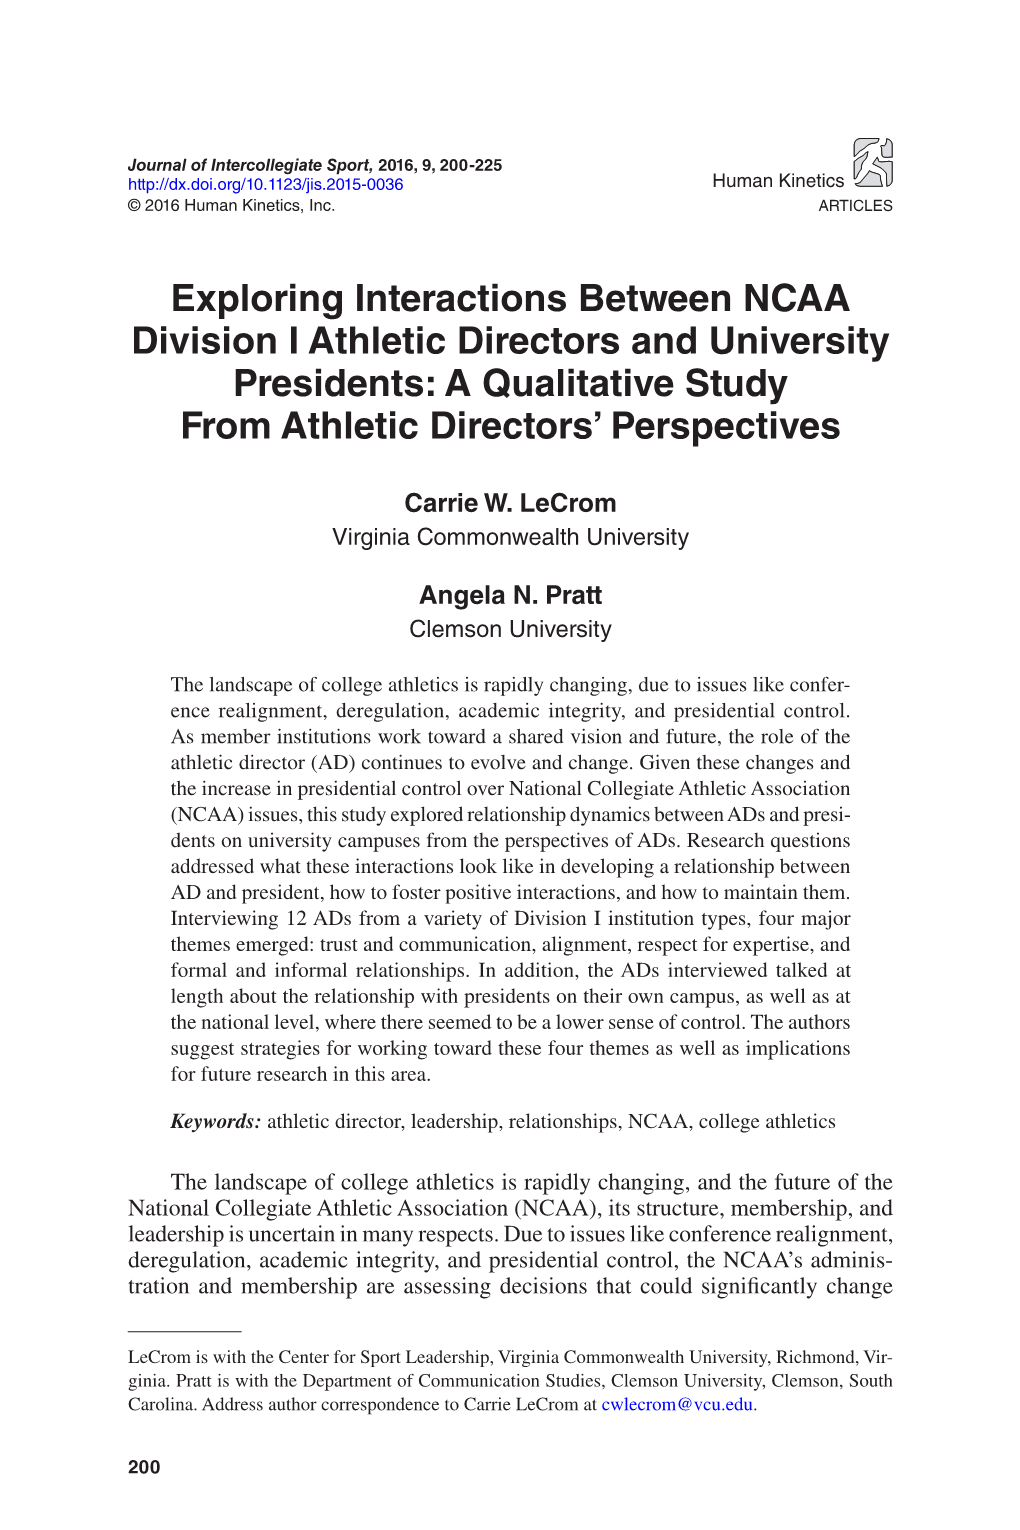 Exploring Interactions Between NCAA Division I Athletic Directors and University Presidents: a Qualitative Study from Athletic Directors’ Perspectives